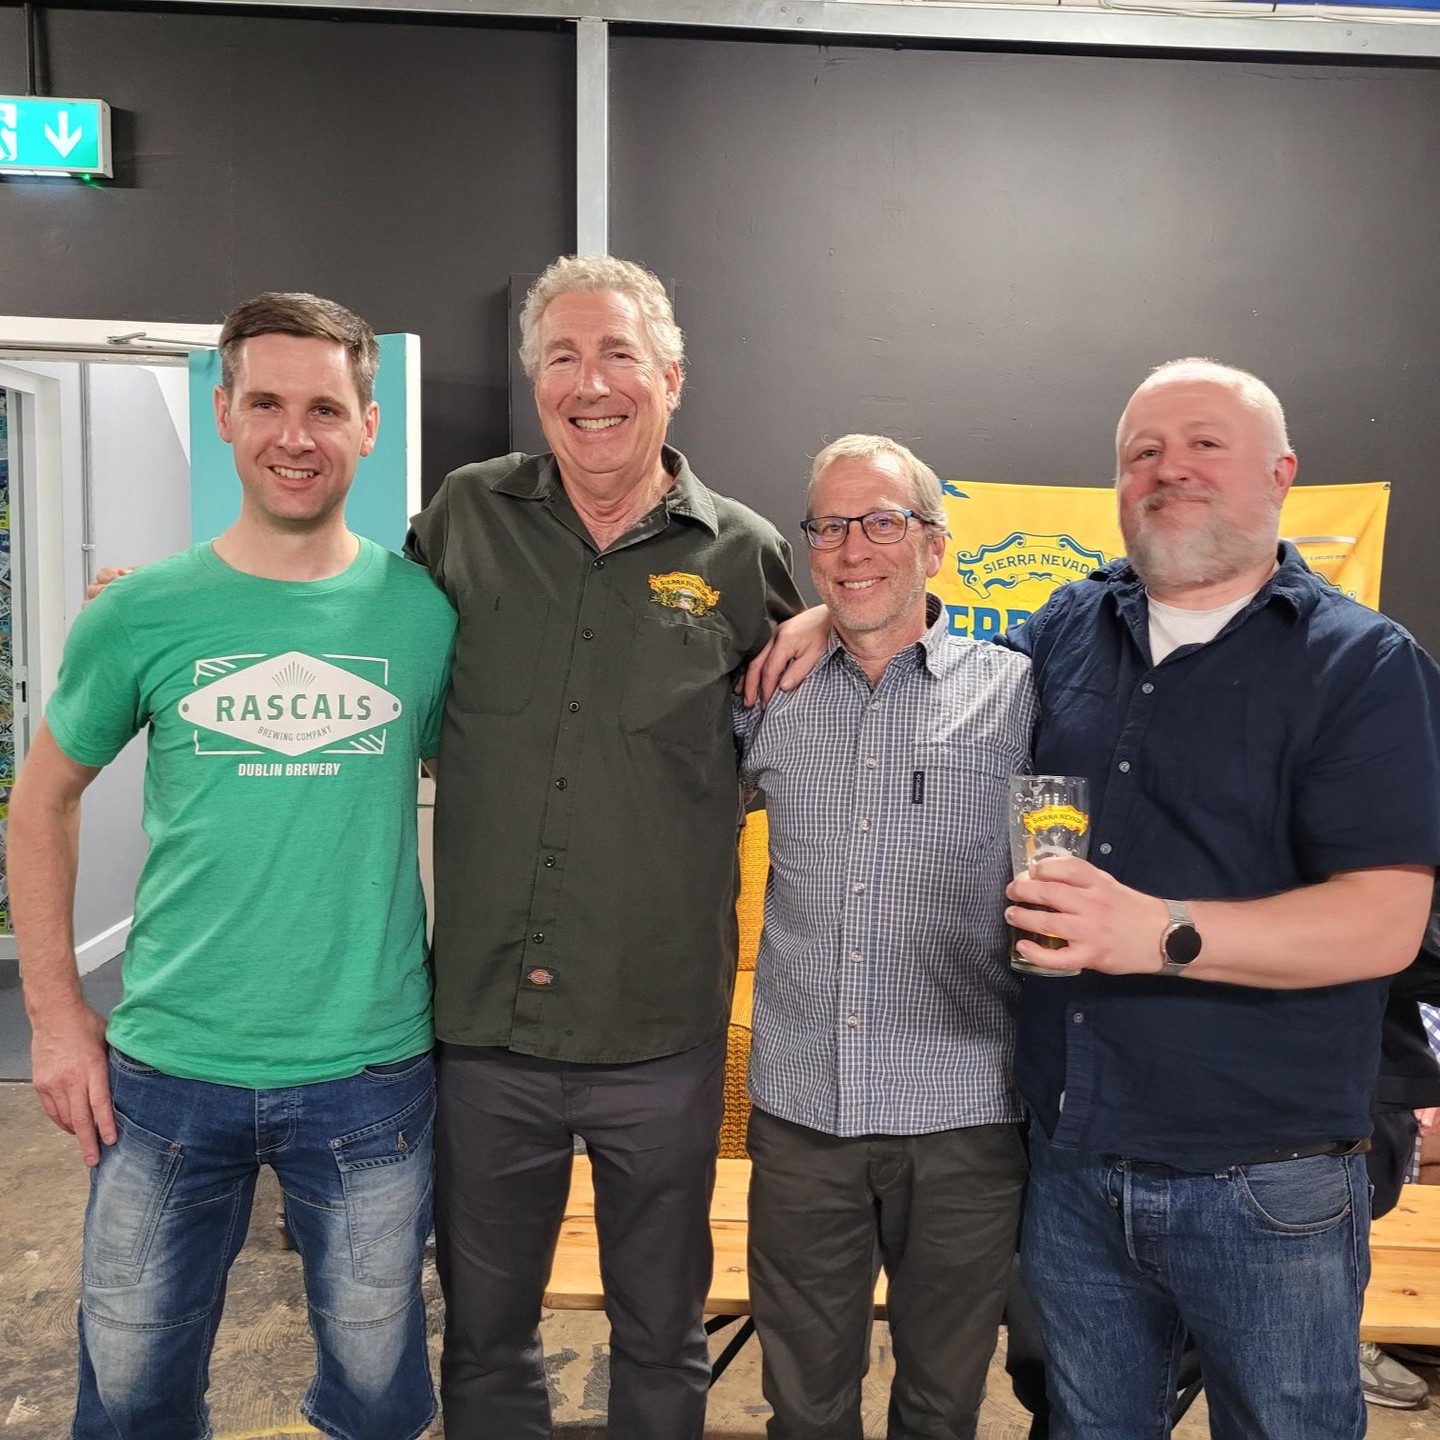 Great evening last night at Rascals! Brilliant discussion and Q&A featuring Cathal & Josh from Rascal's & Sierra Nevada's Steve Grossmann & Mike Palmer. And of course there were fresh Sierra Nevada and Rascals beers to keep everyone hydrated throughout the Q&A 🍻 Props to @rascalsbrewing & the great distributor @grandcrubeers for fantastic hosting. Thanks for having us! And cheers to Cathal, Steve, Rick & Ken for being good sports and posing for a photo for us!🤙